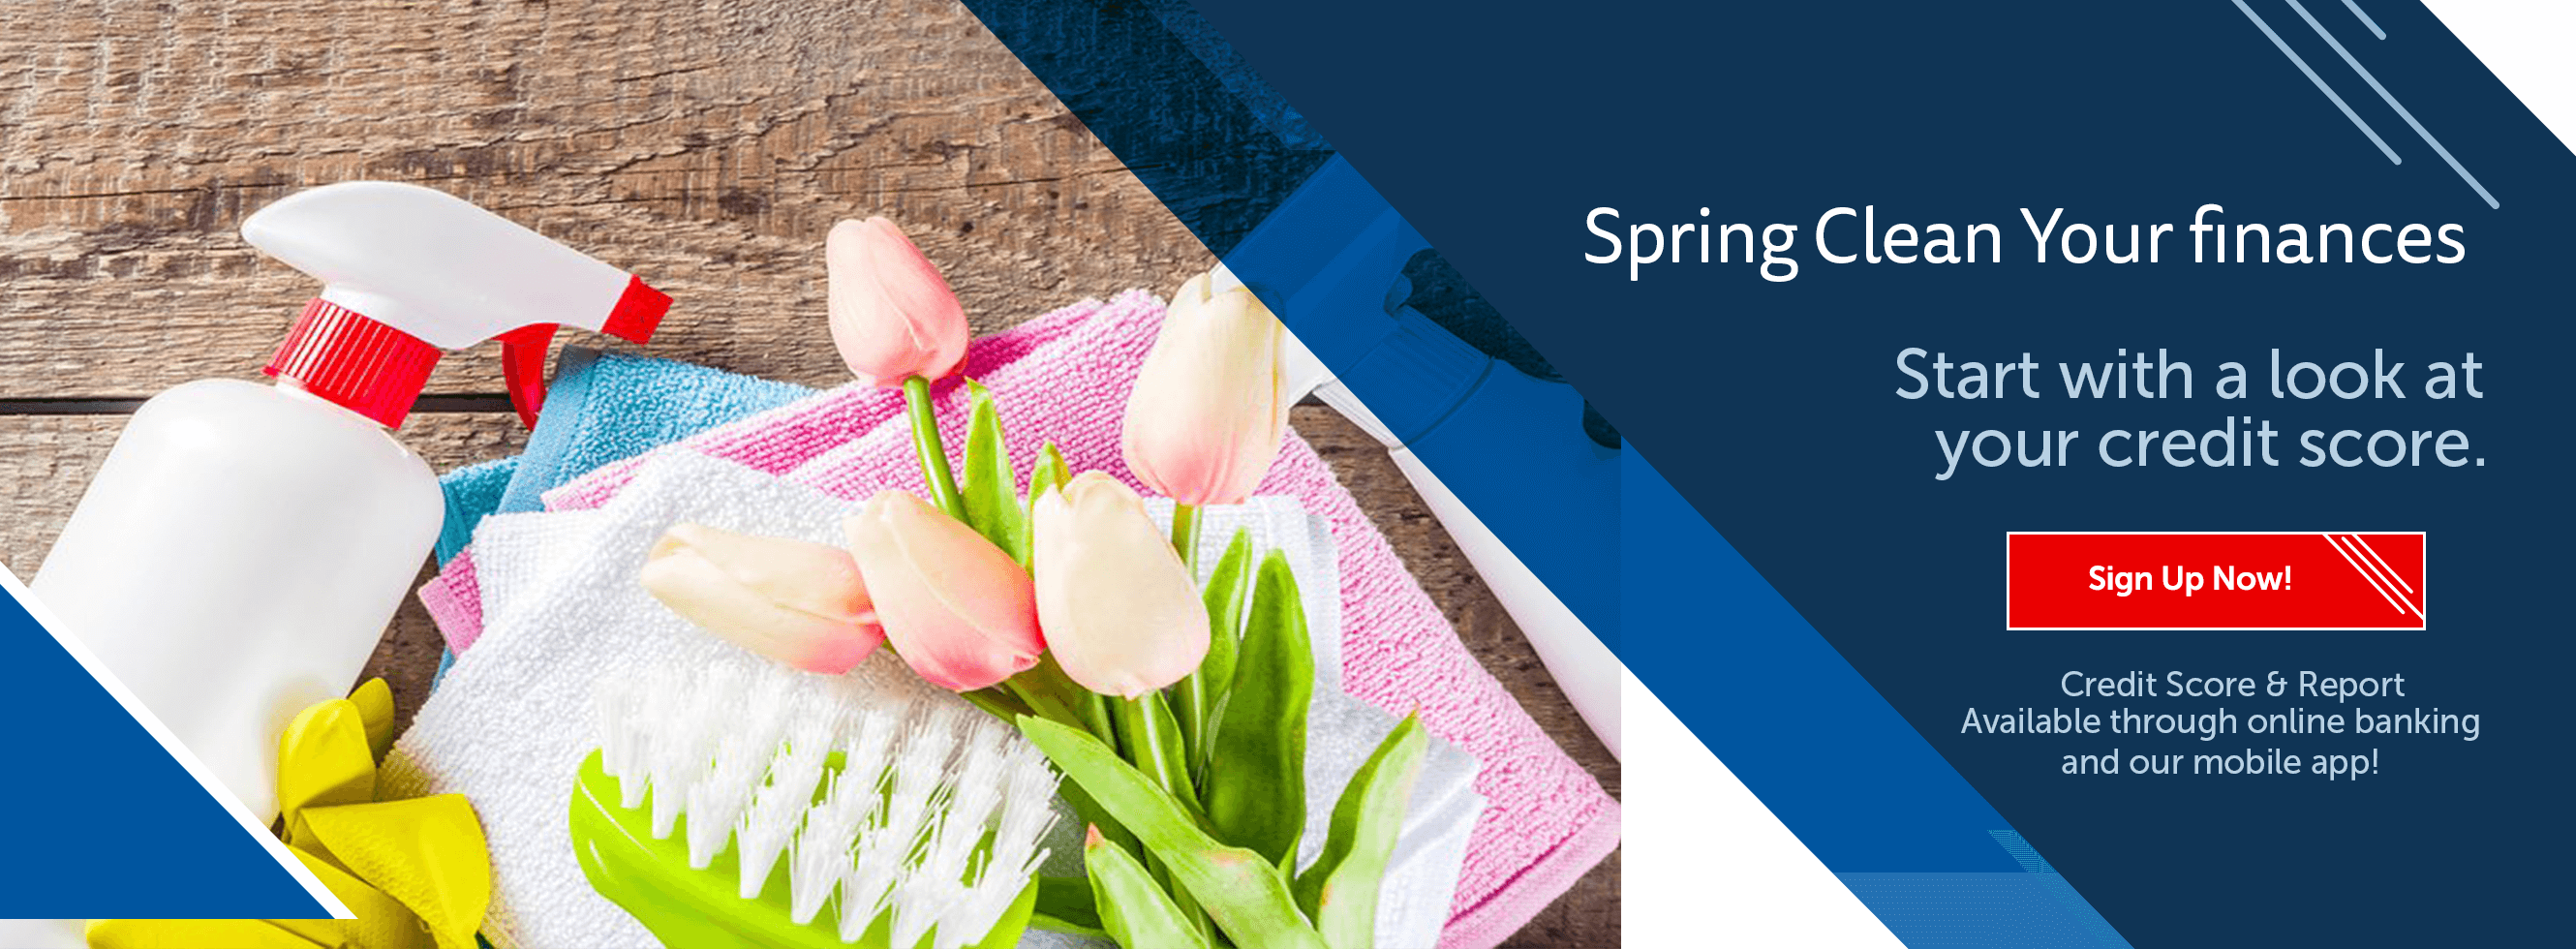 Spring Clean Your Finances Start with a look at  your credit score.